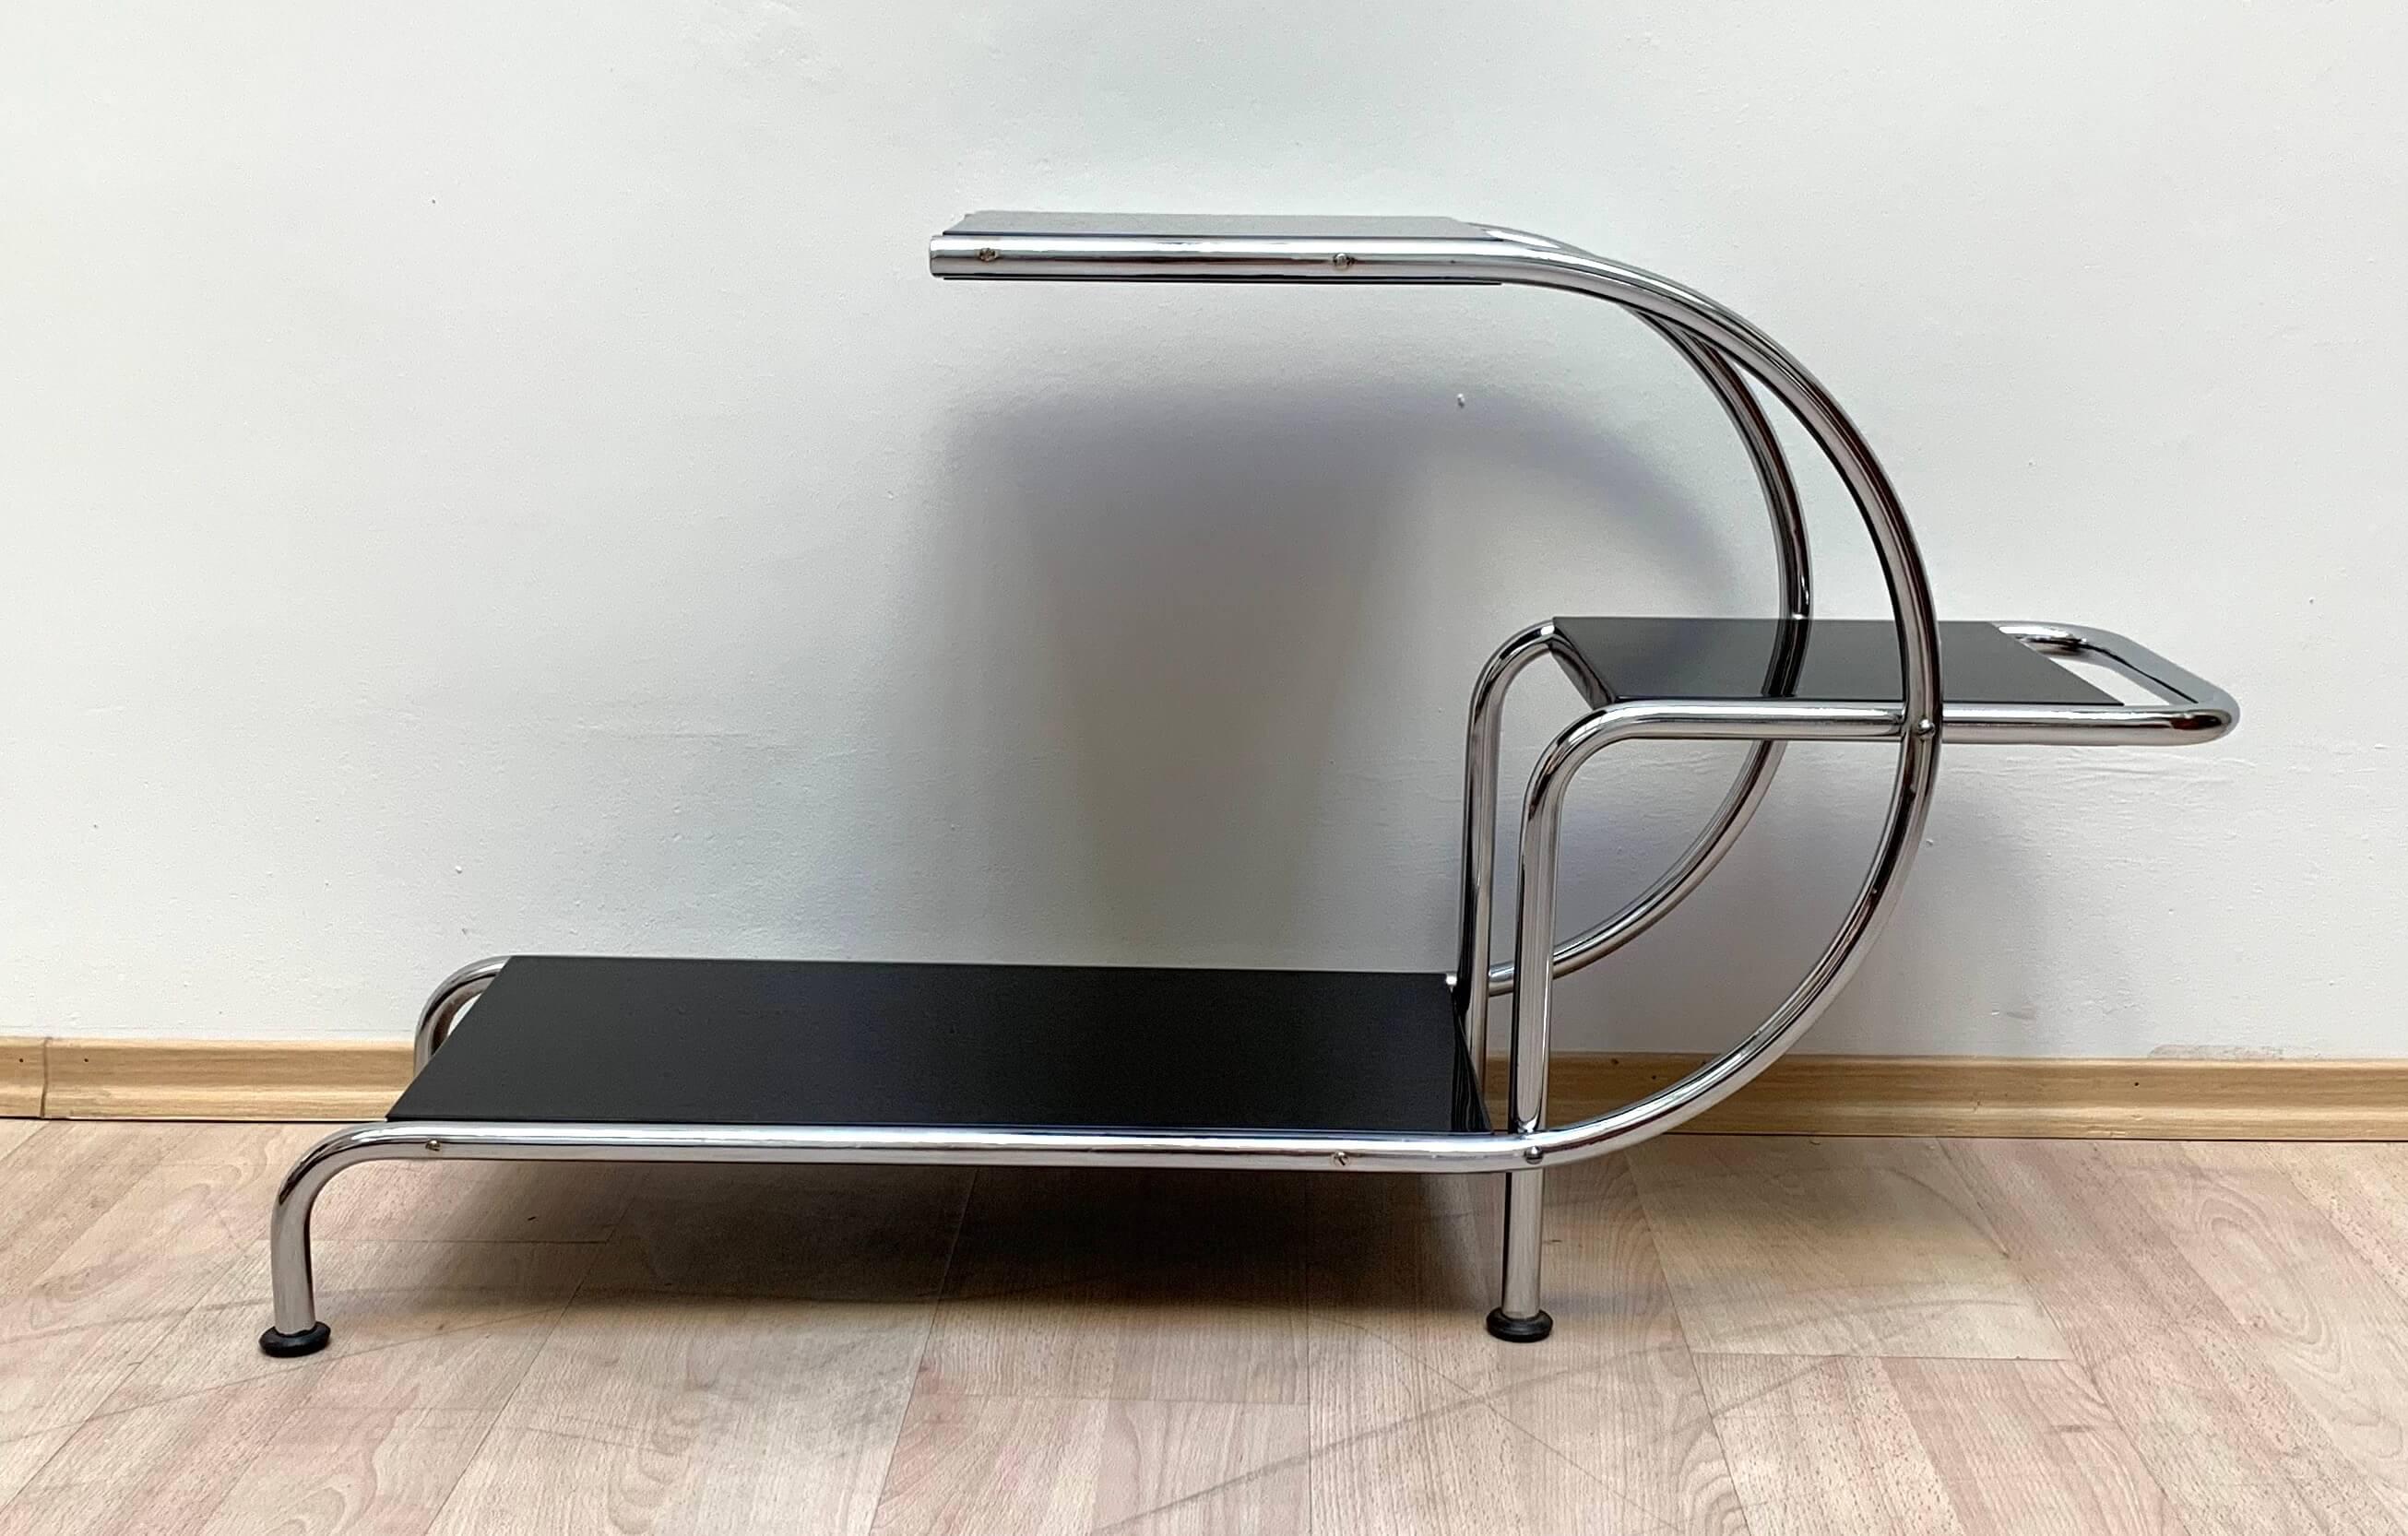 Galvanized Bauhaus Steeltube Étagère, Nickel and Black Lacquer, Germany/Czechia, 1930s For Sale